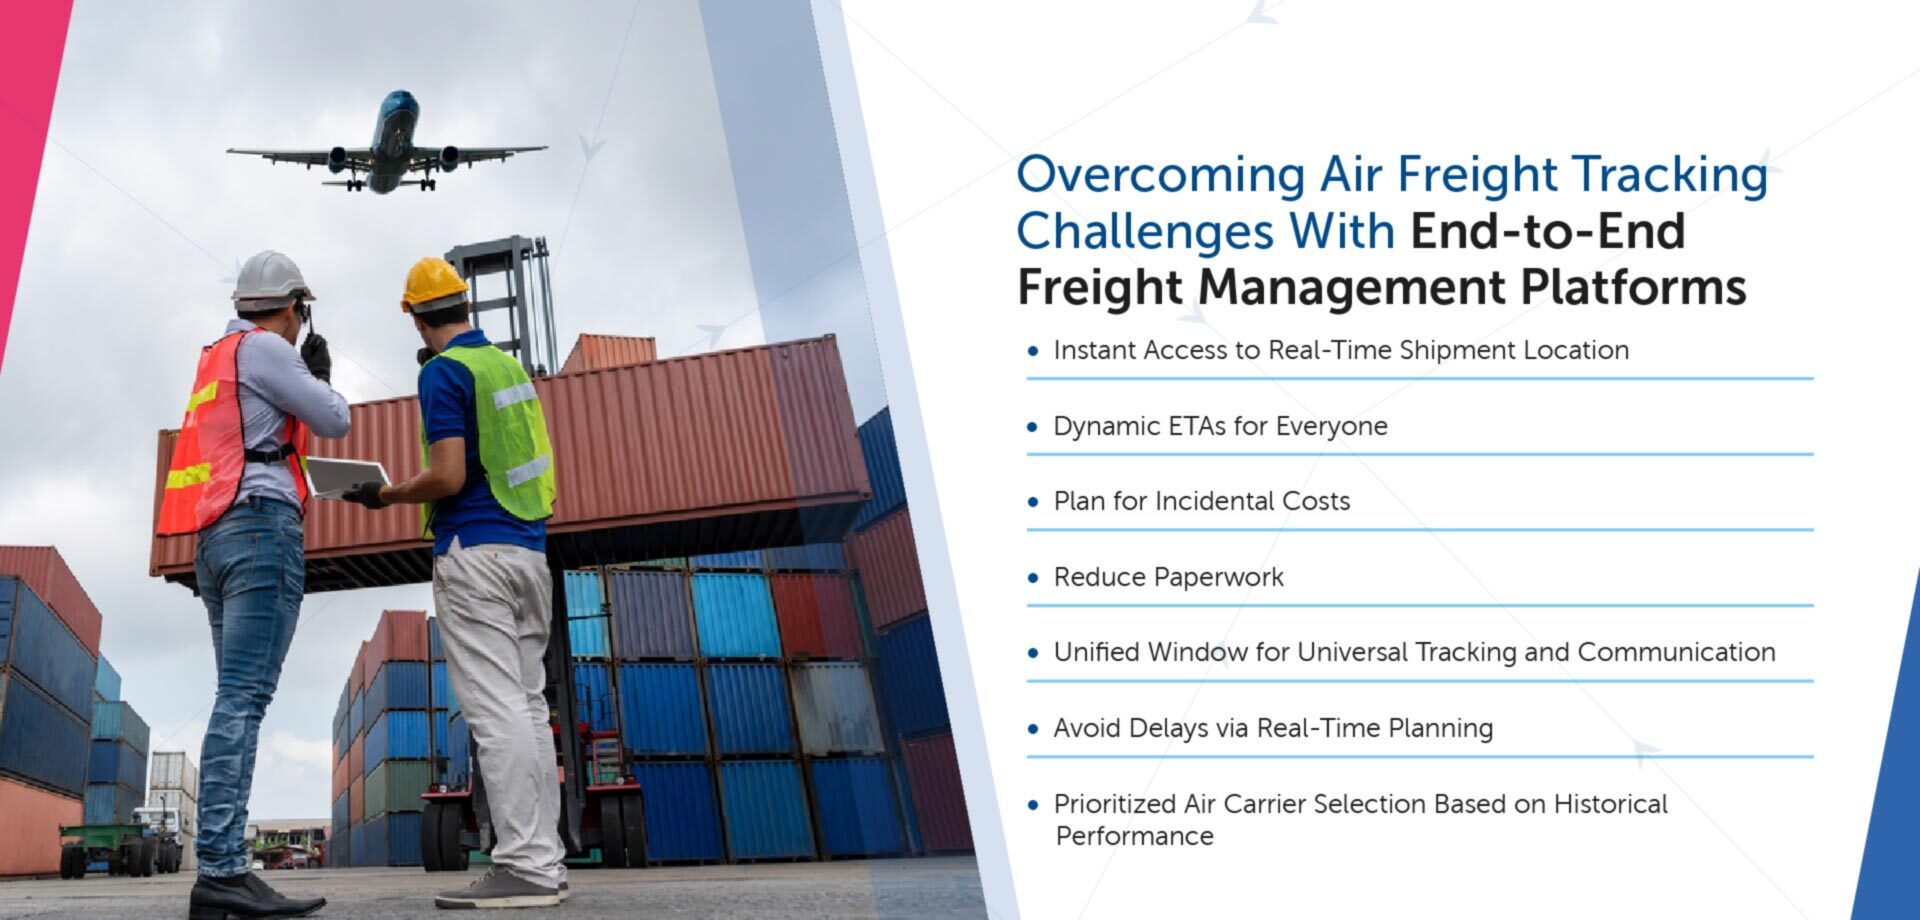 Air freight tracking software